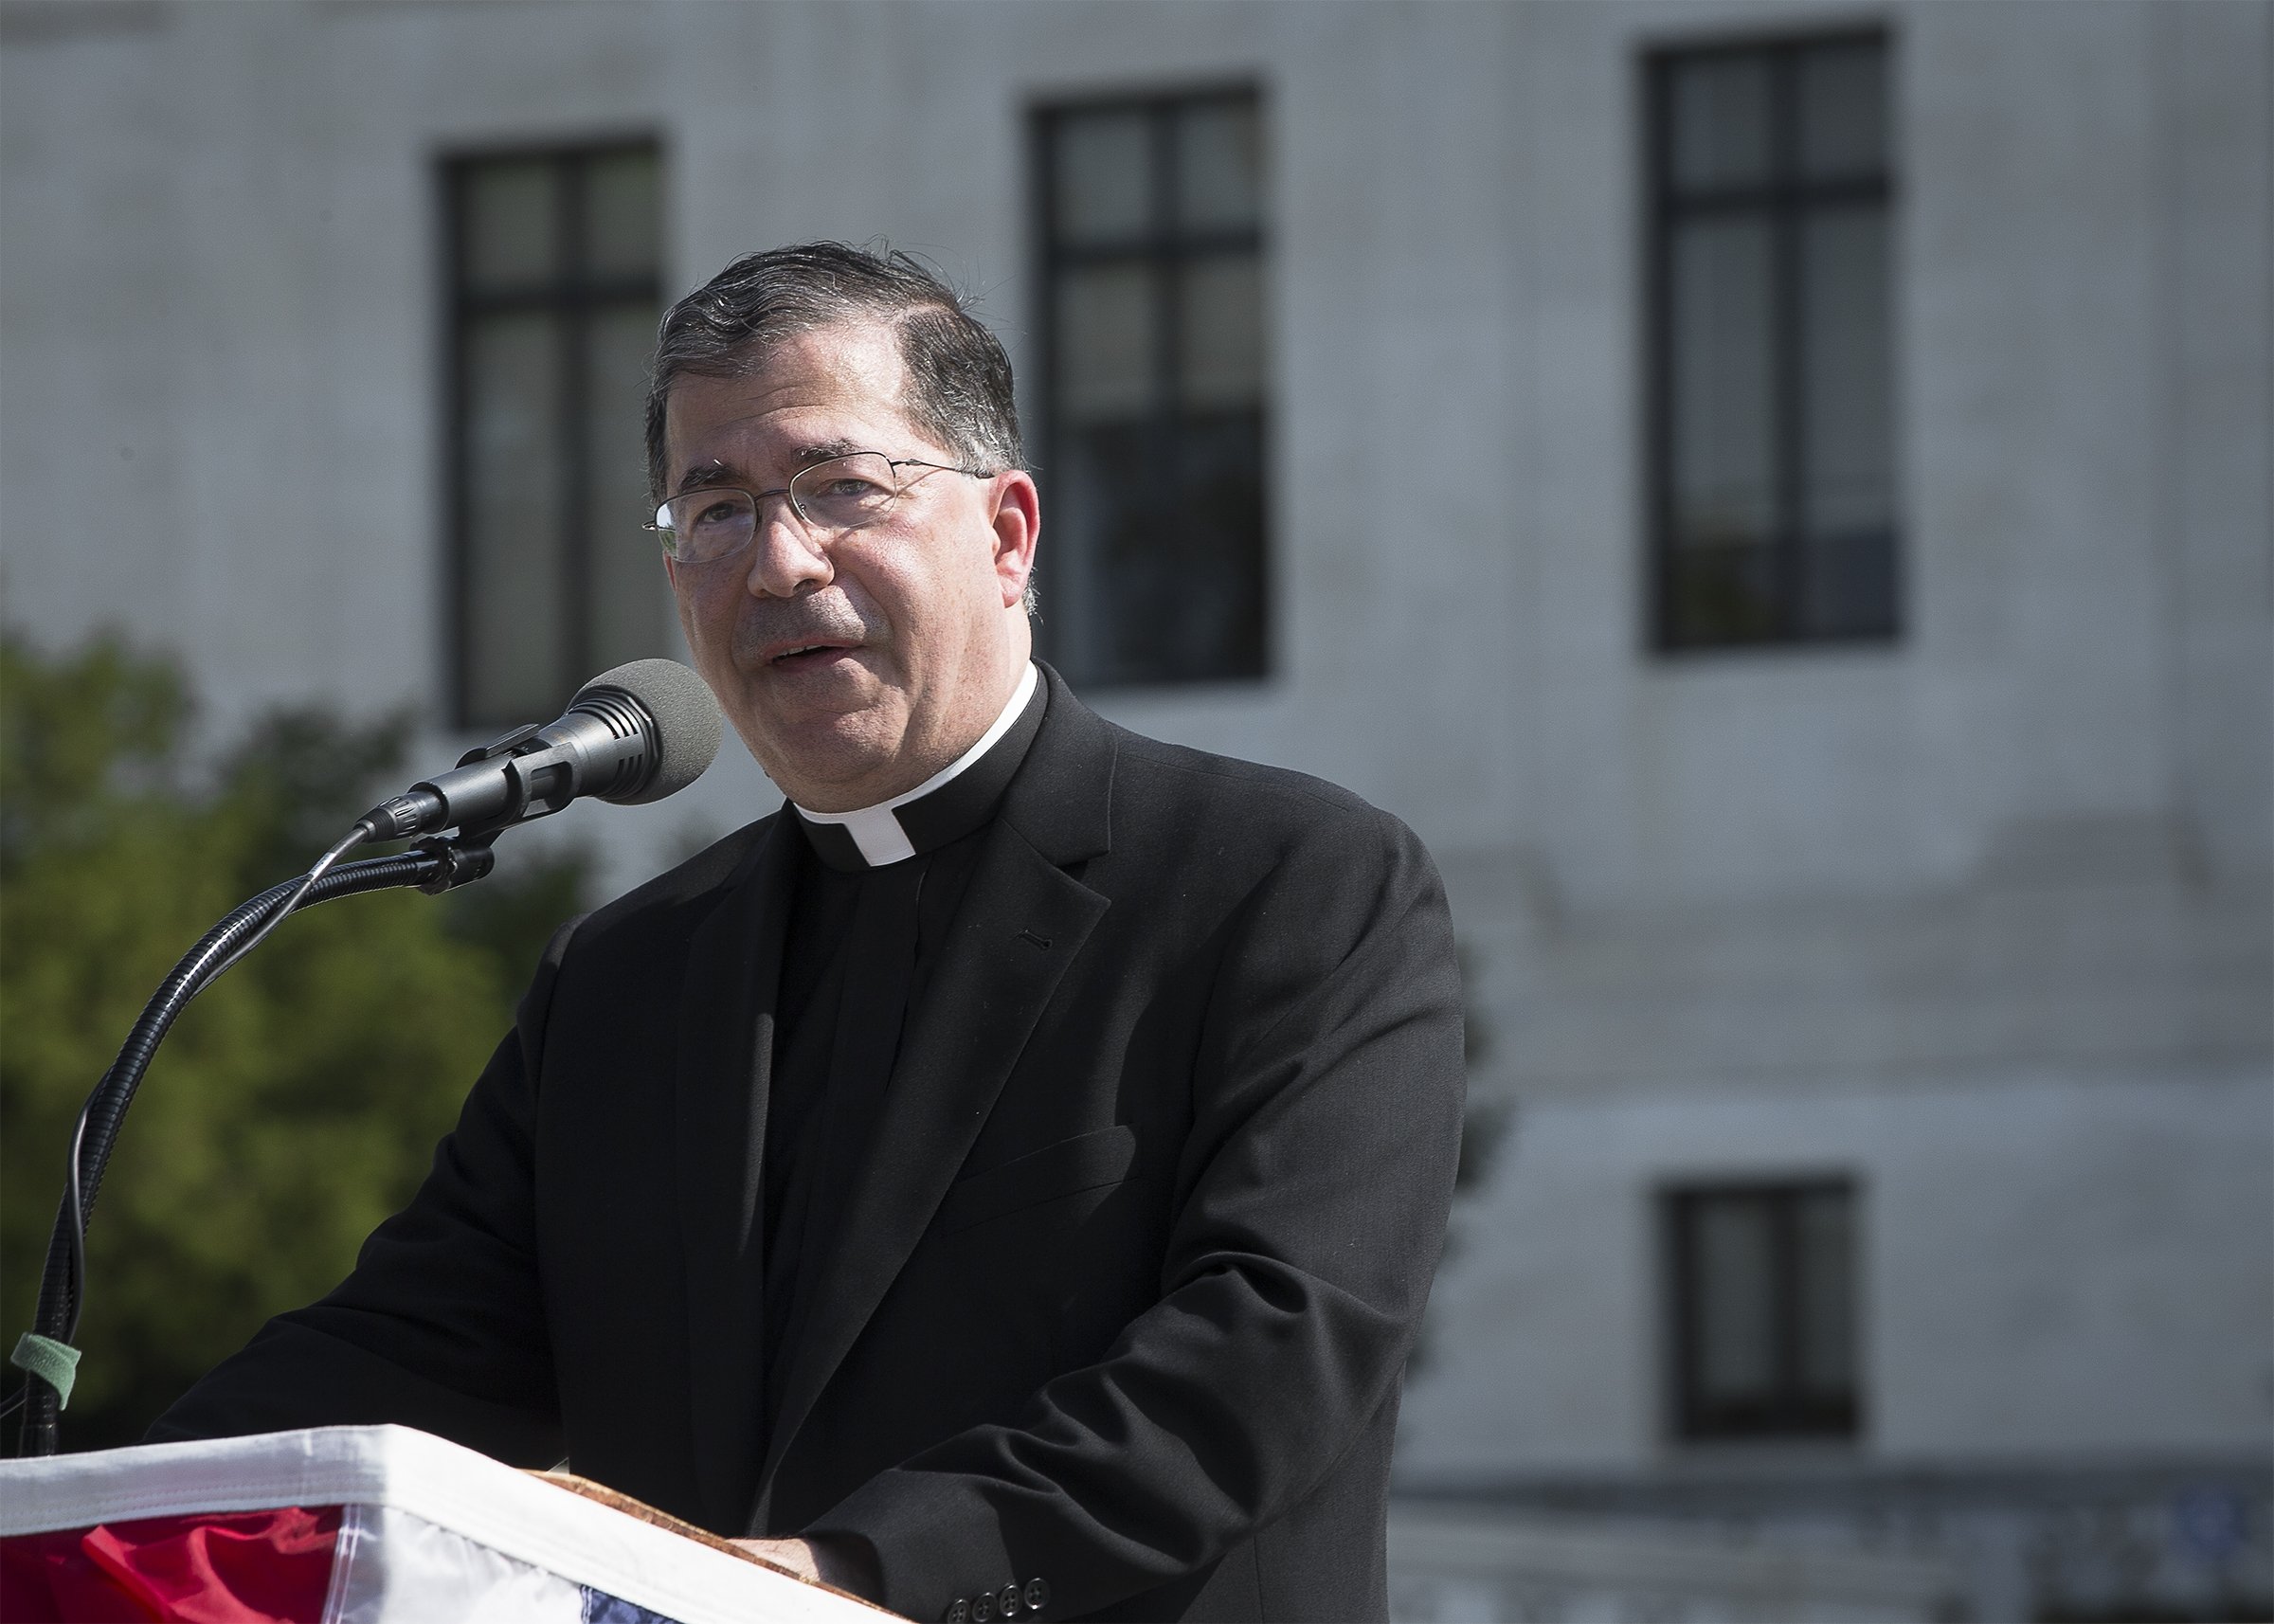 Father Frank Pavone, national director of Priests for Life, speaks in front of the U.S. Supreme Court in Washington Oct. 1, 2019. 